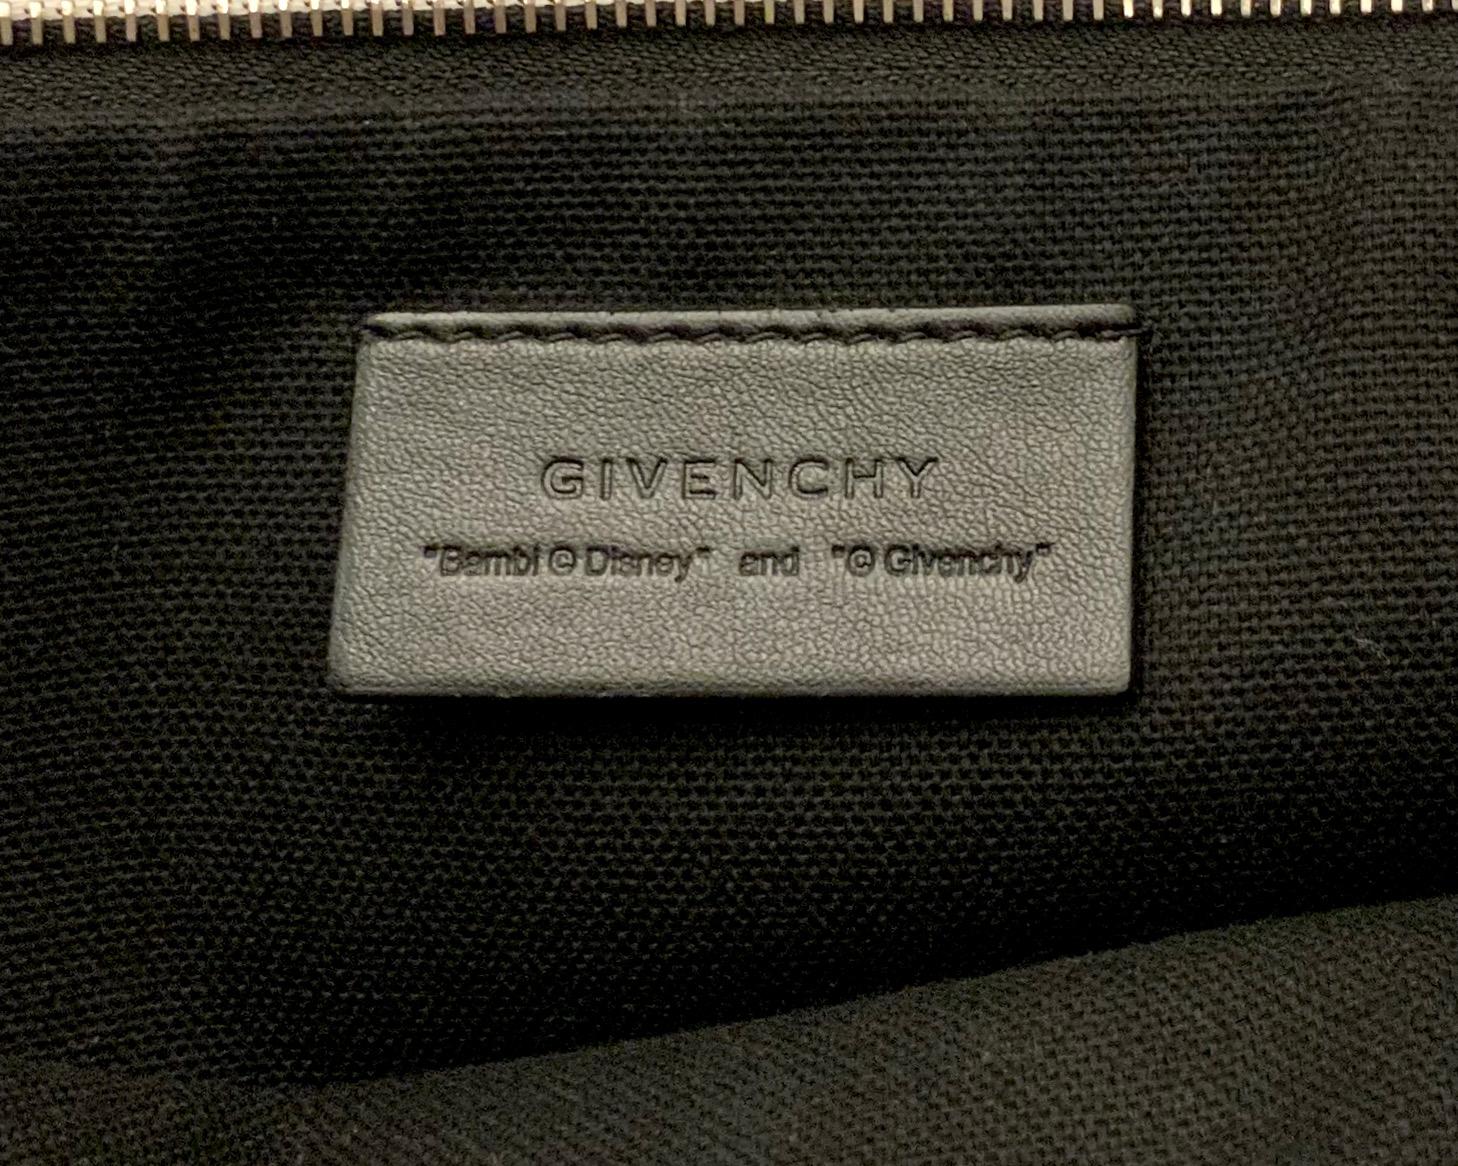 givenchy bambi pouch